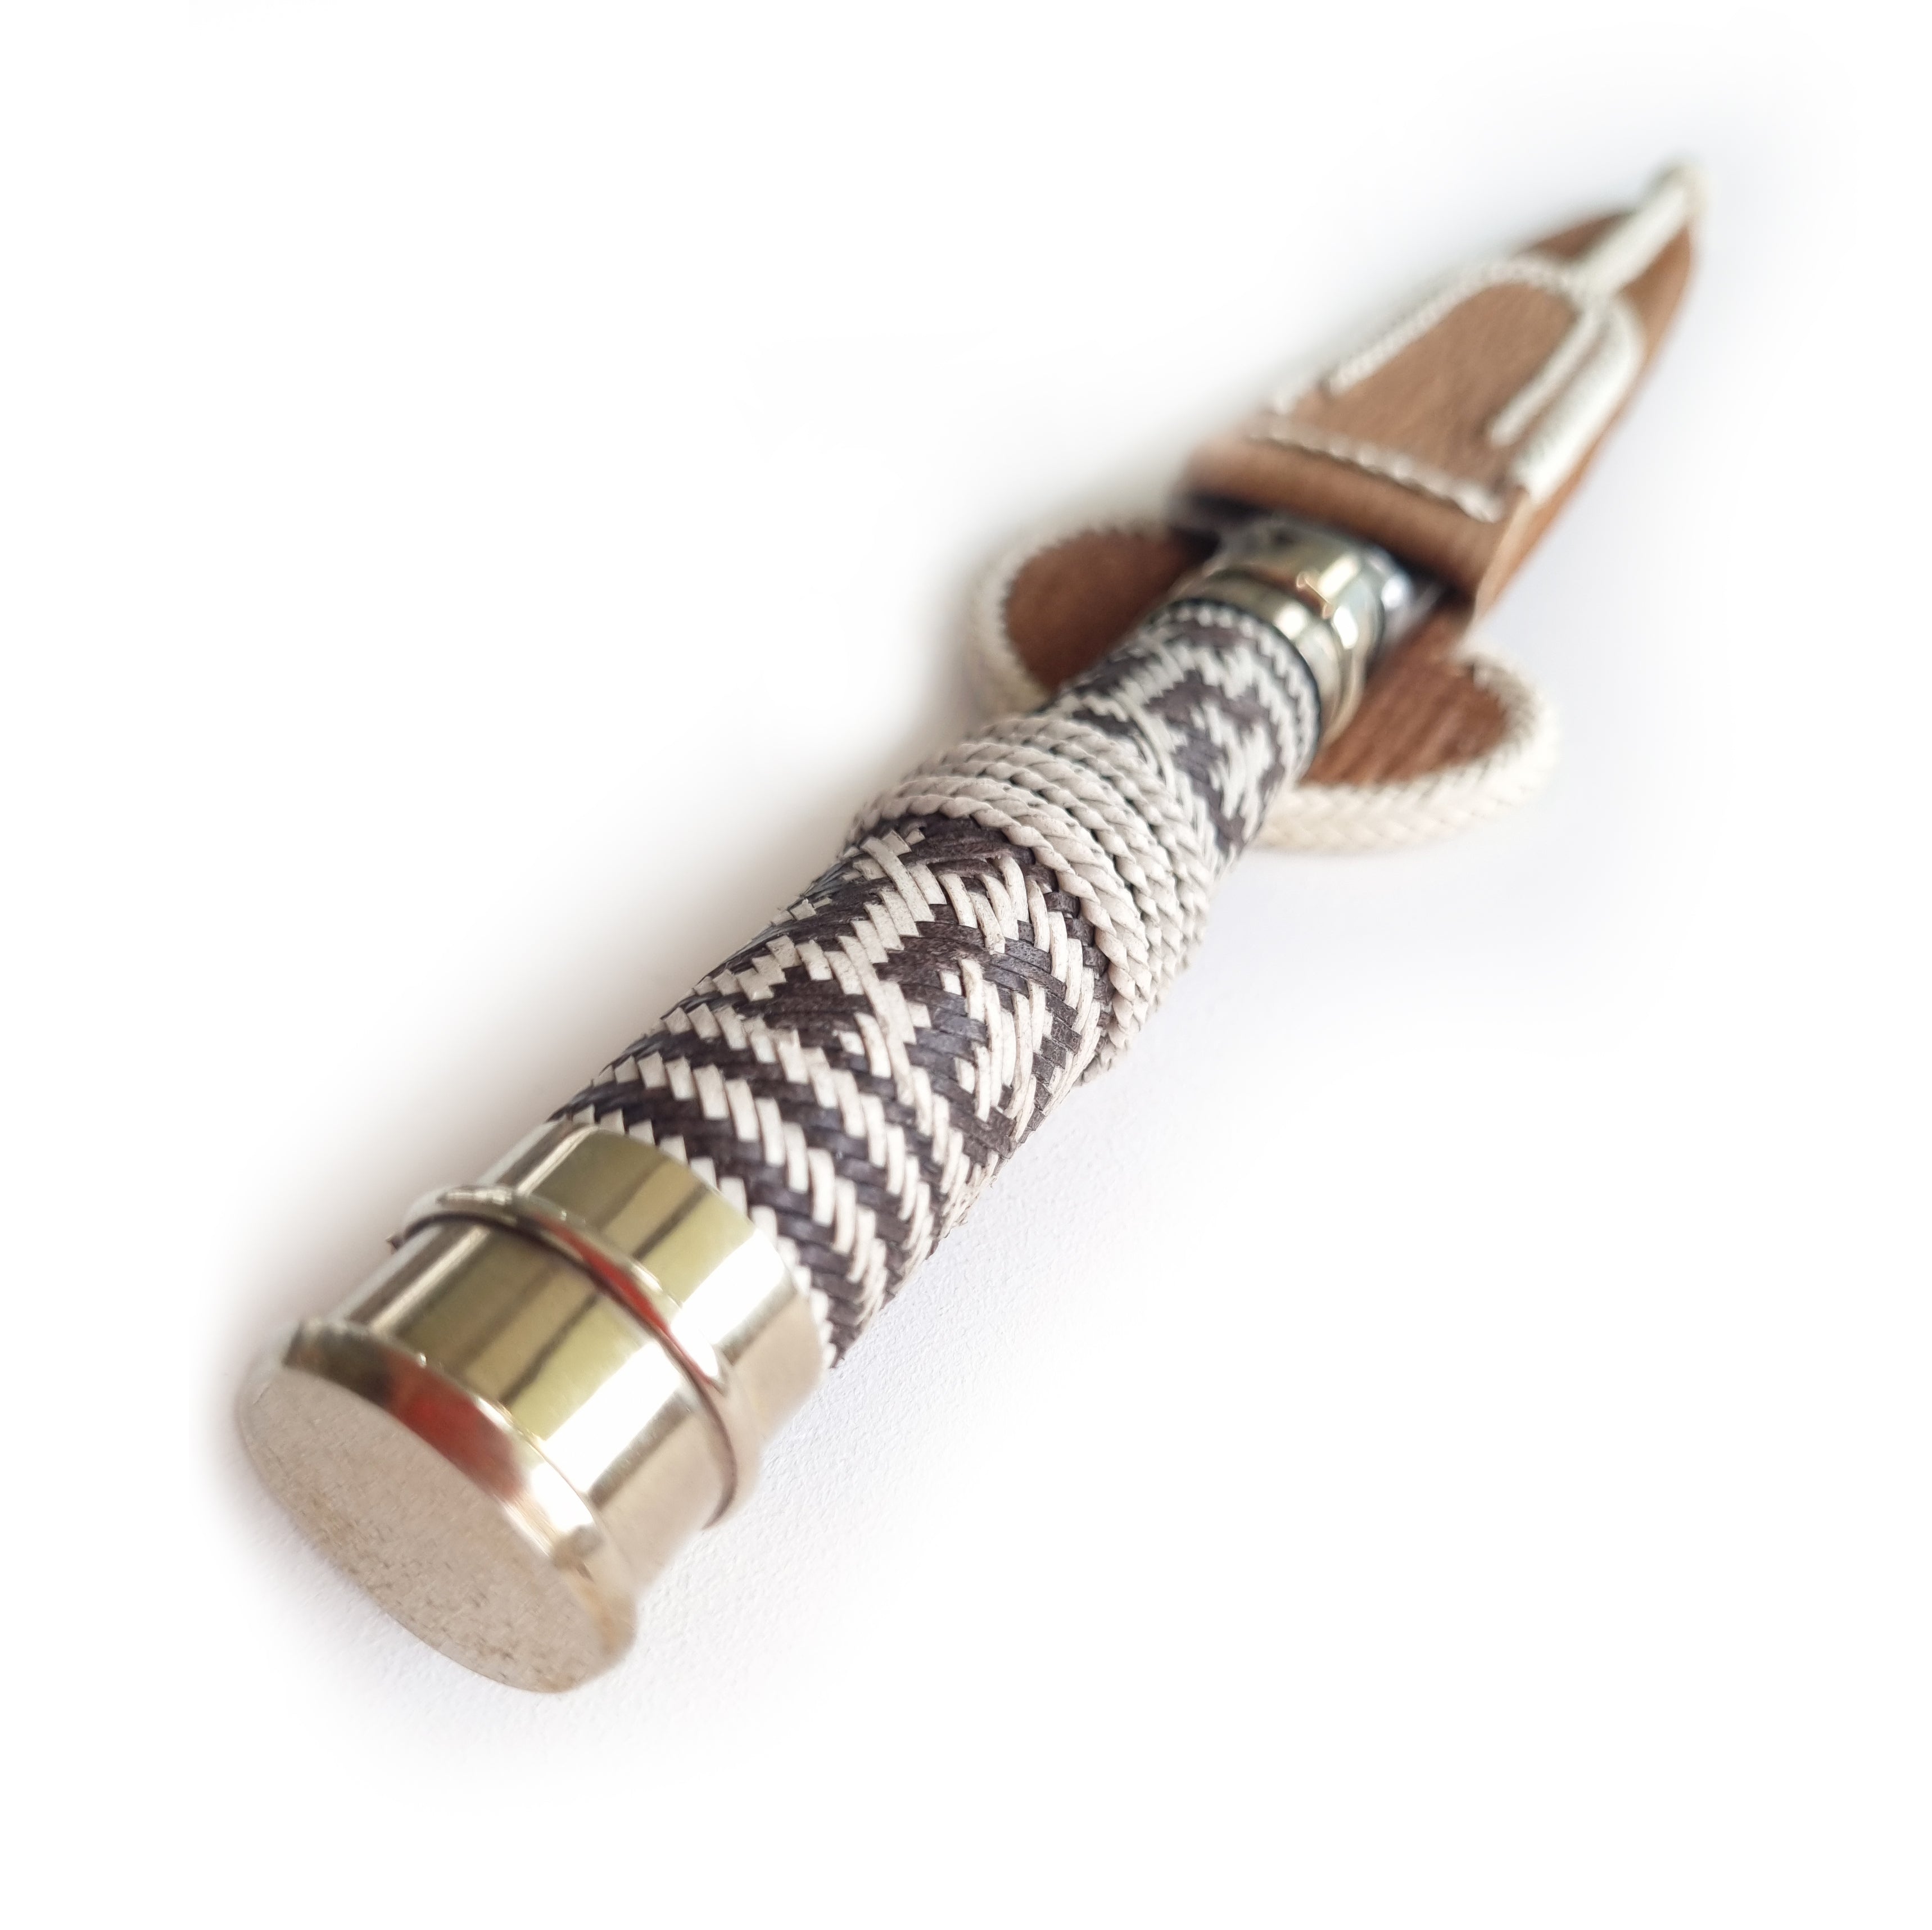 Braided leather knife - NEW!!!